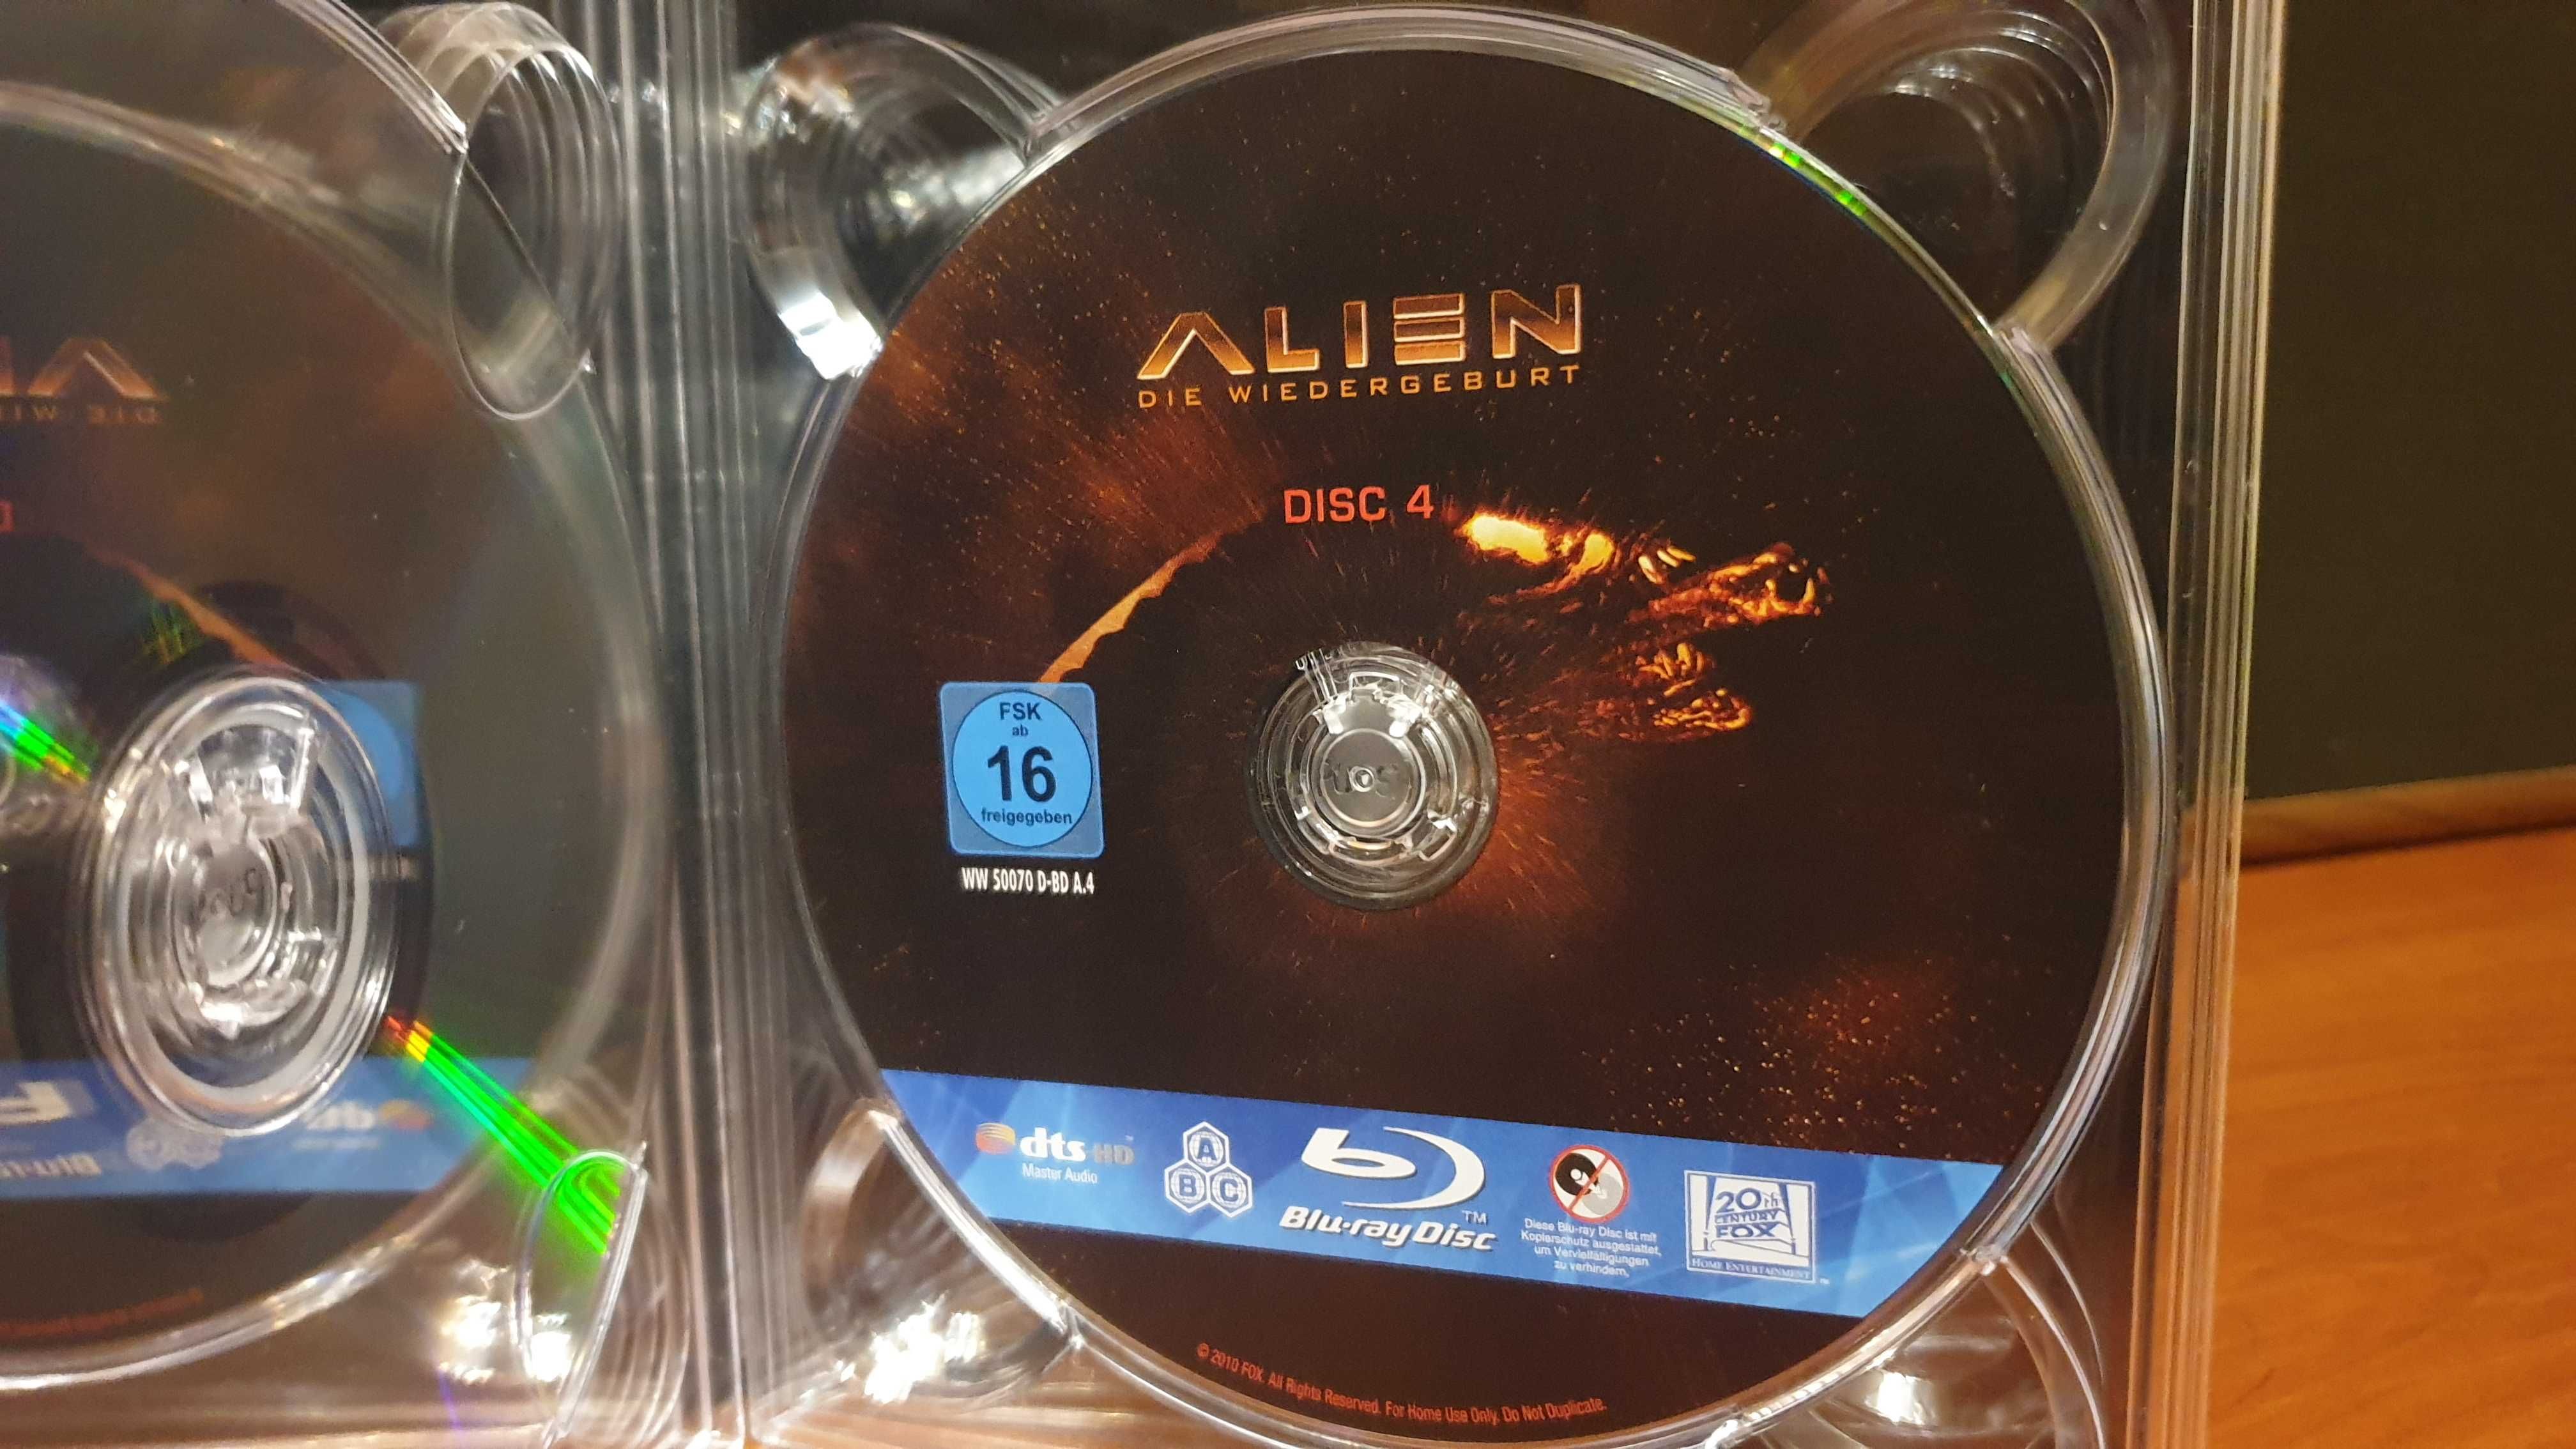 Alien Anthology  Blu-ray Limited Edition